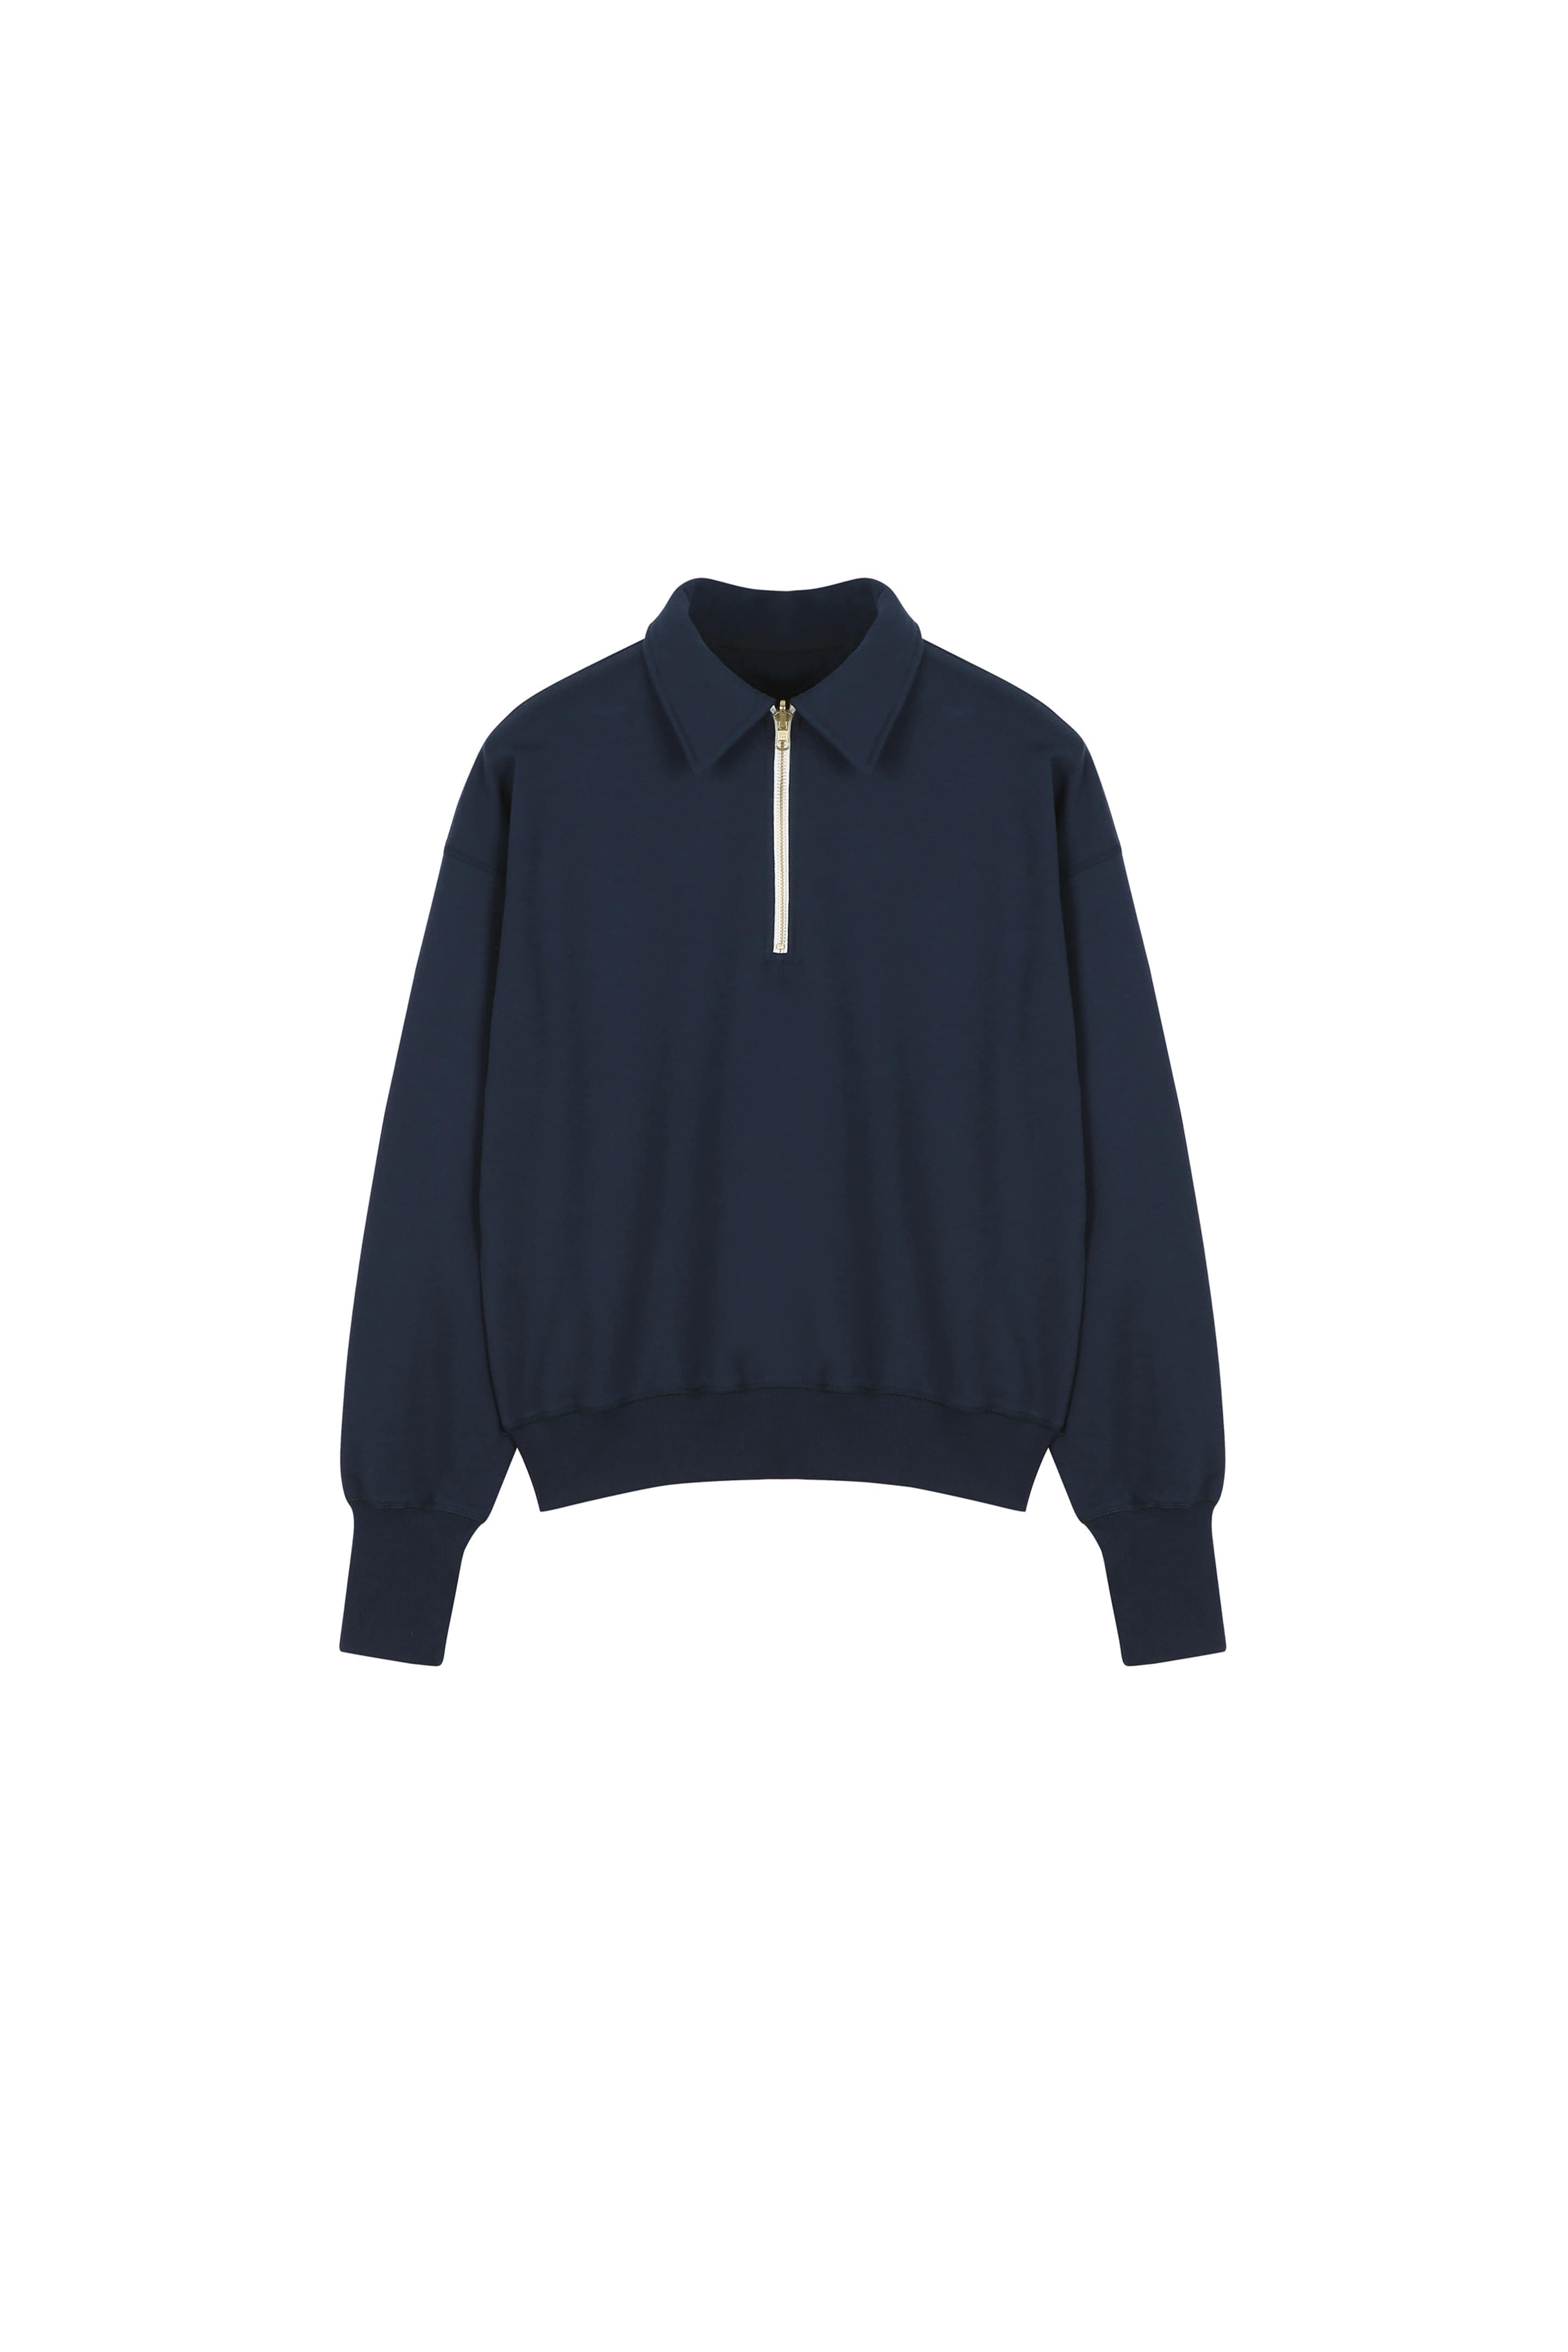 9th) ORE COTTON 001 zip-up Navy